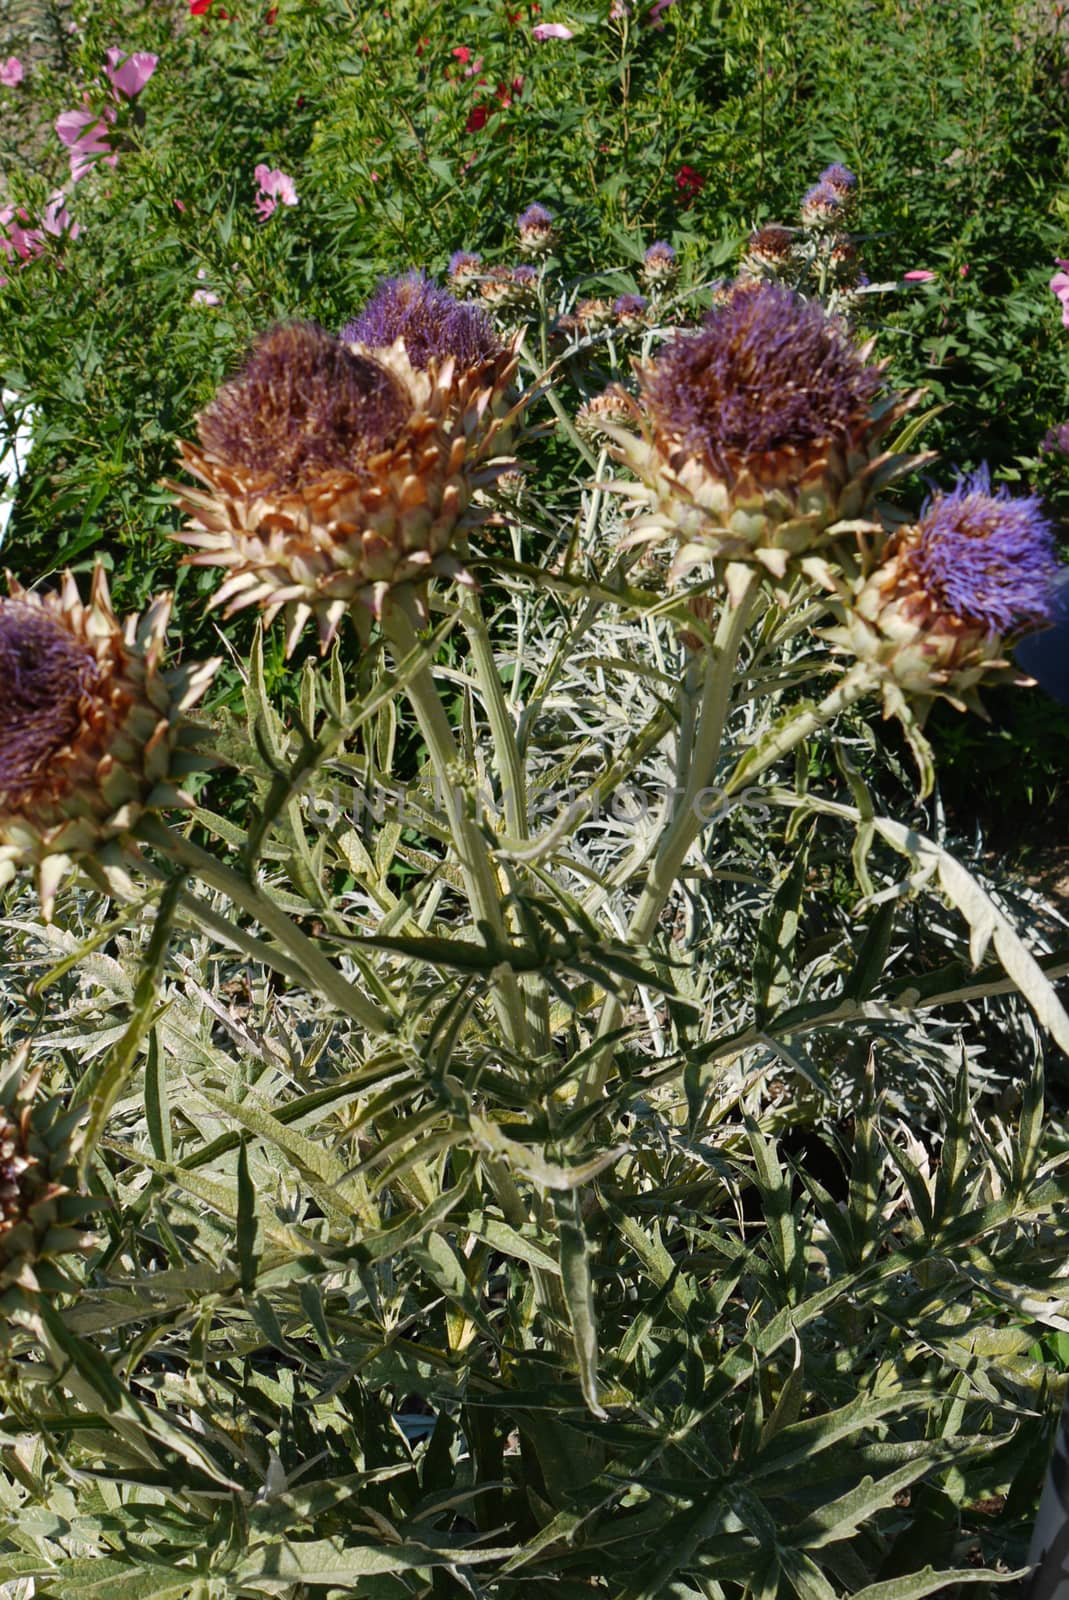 Flower burdock with a single stem and several branches with spines. A plant that grows in various places, including abandoned.